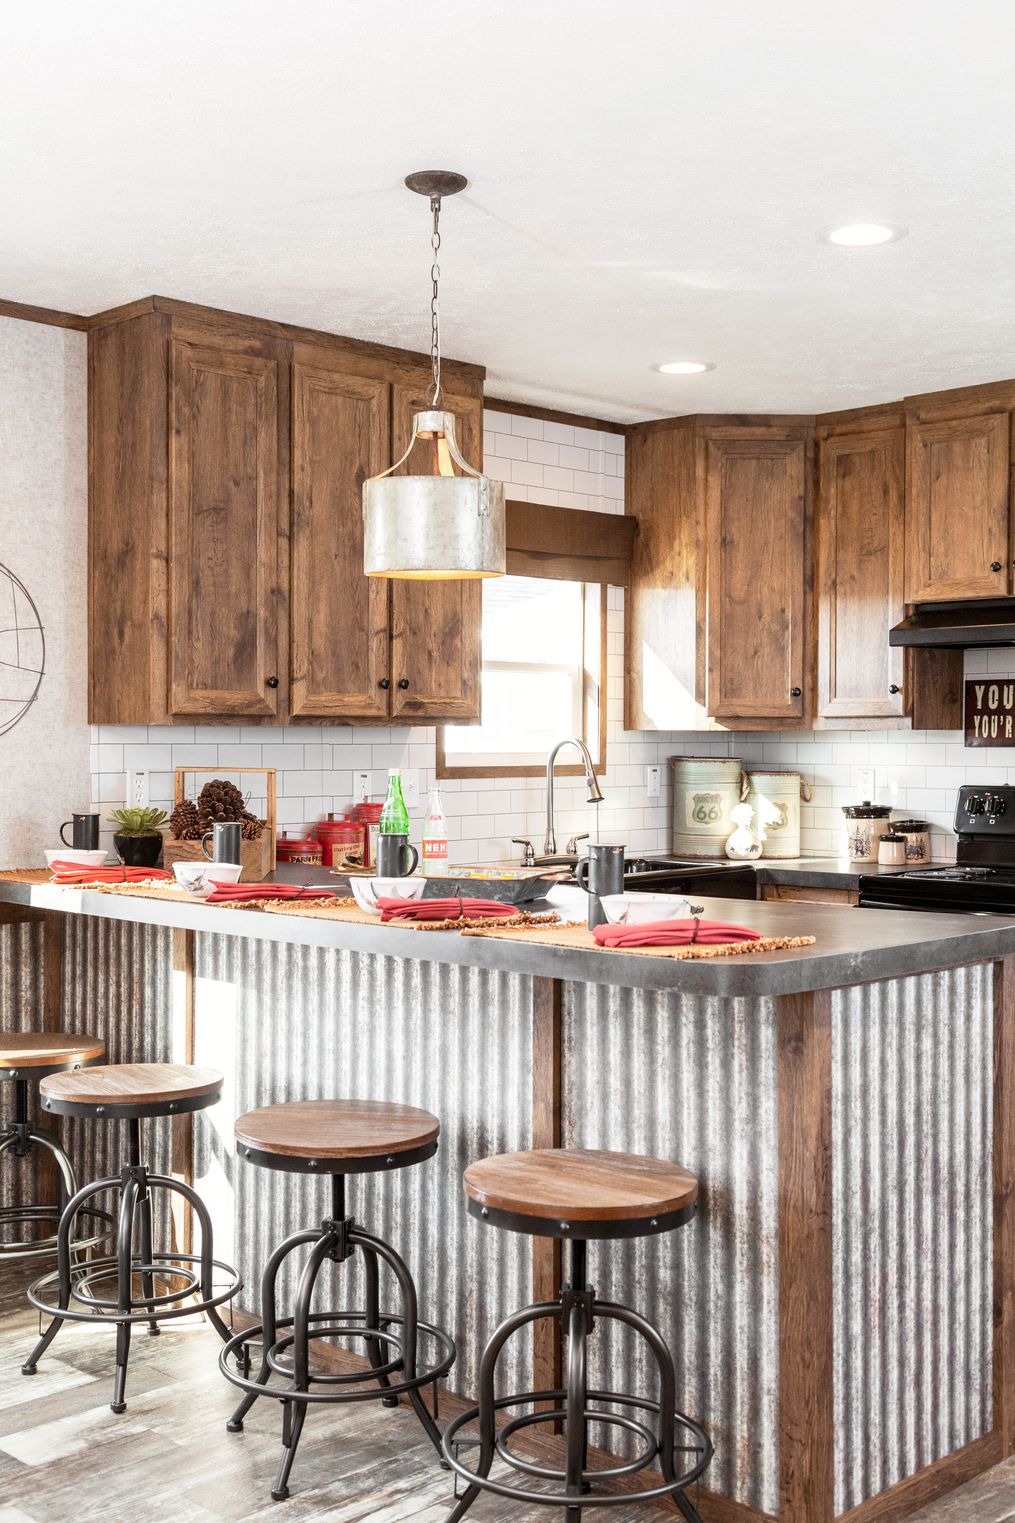 The THE SILO Kitchen. This Manufactured Mobile Home features 2 bedrooms and 1 bath.